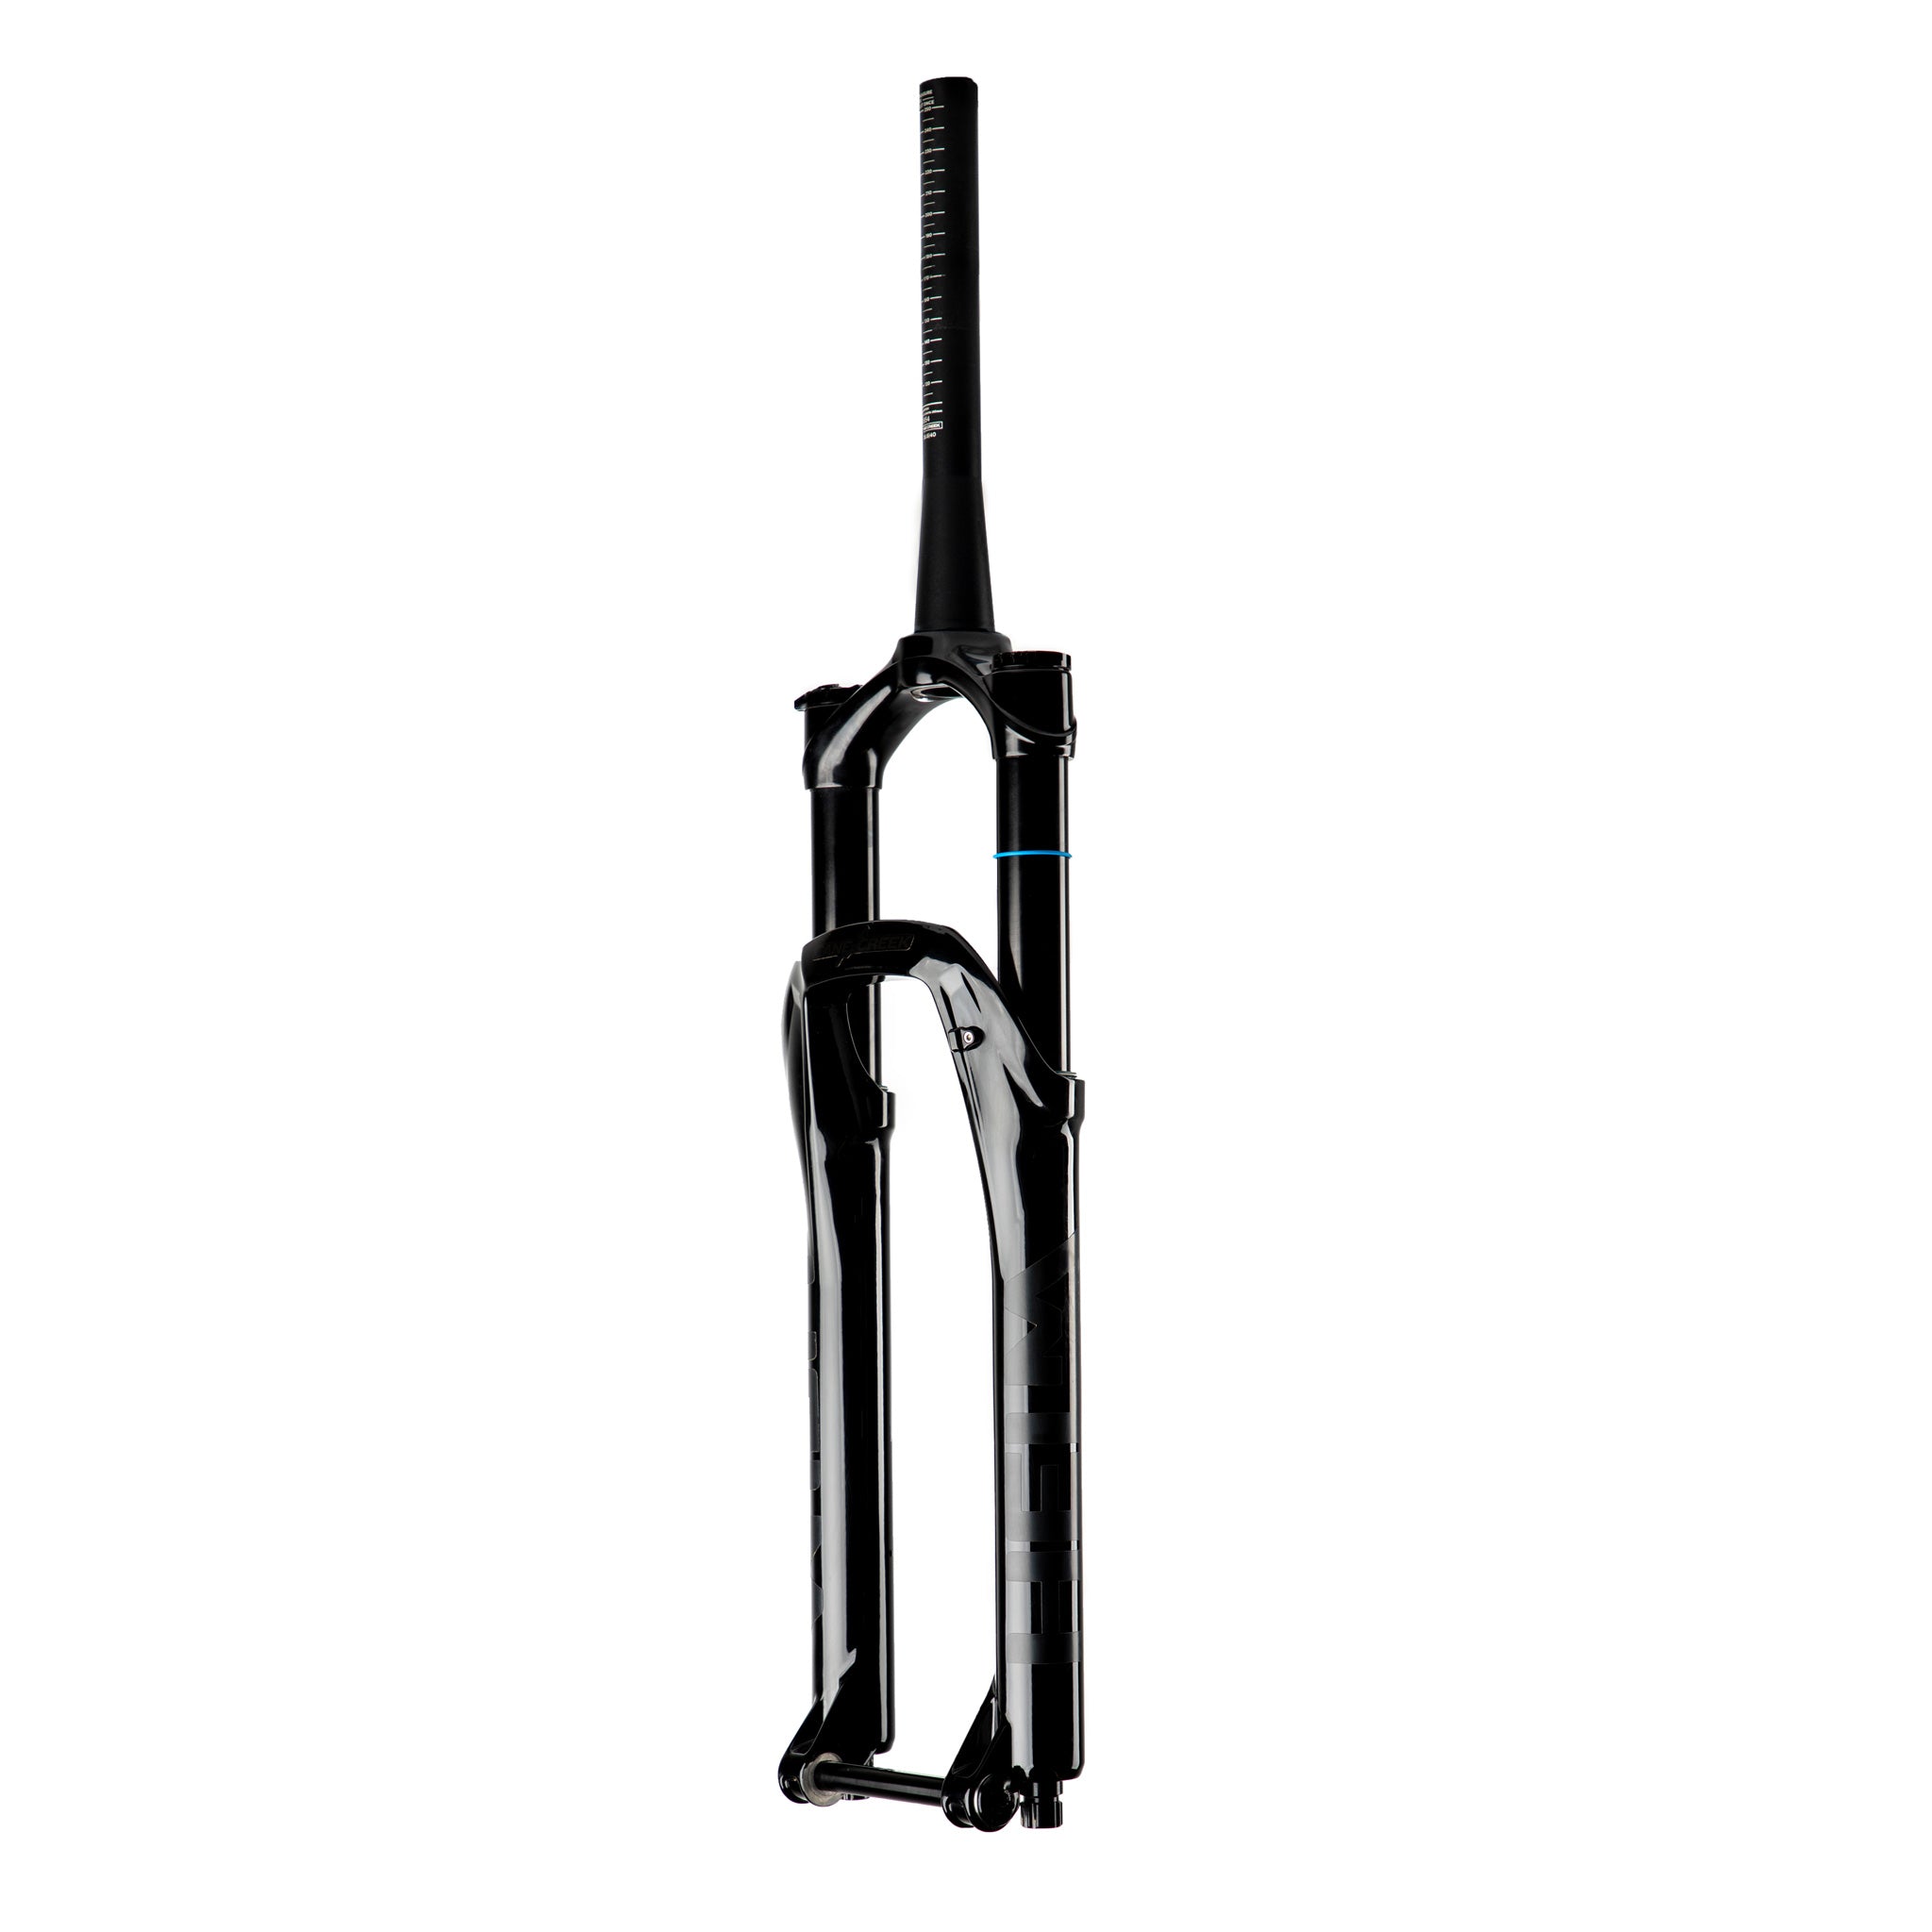 Cane Creek Helm MKII Air 29&quot;/27.5+ Fork (44mm) 140mm - Blk